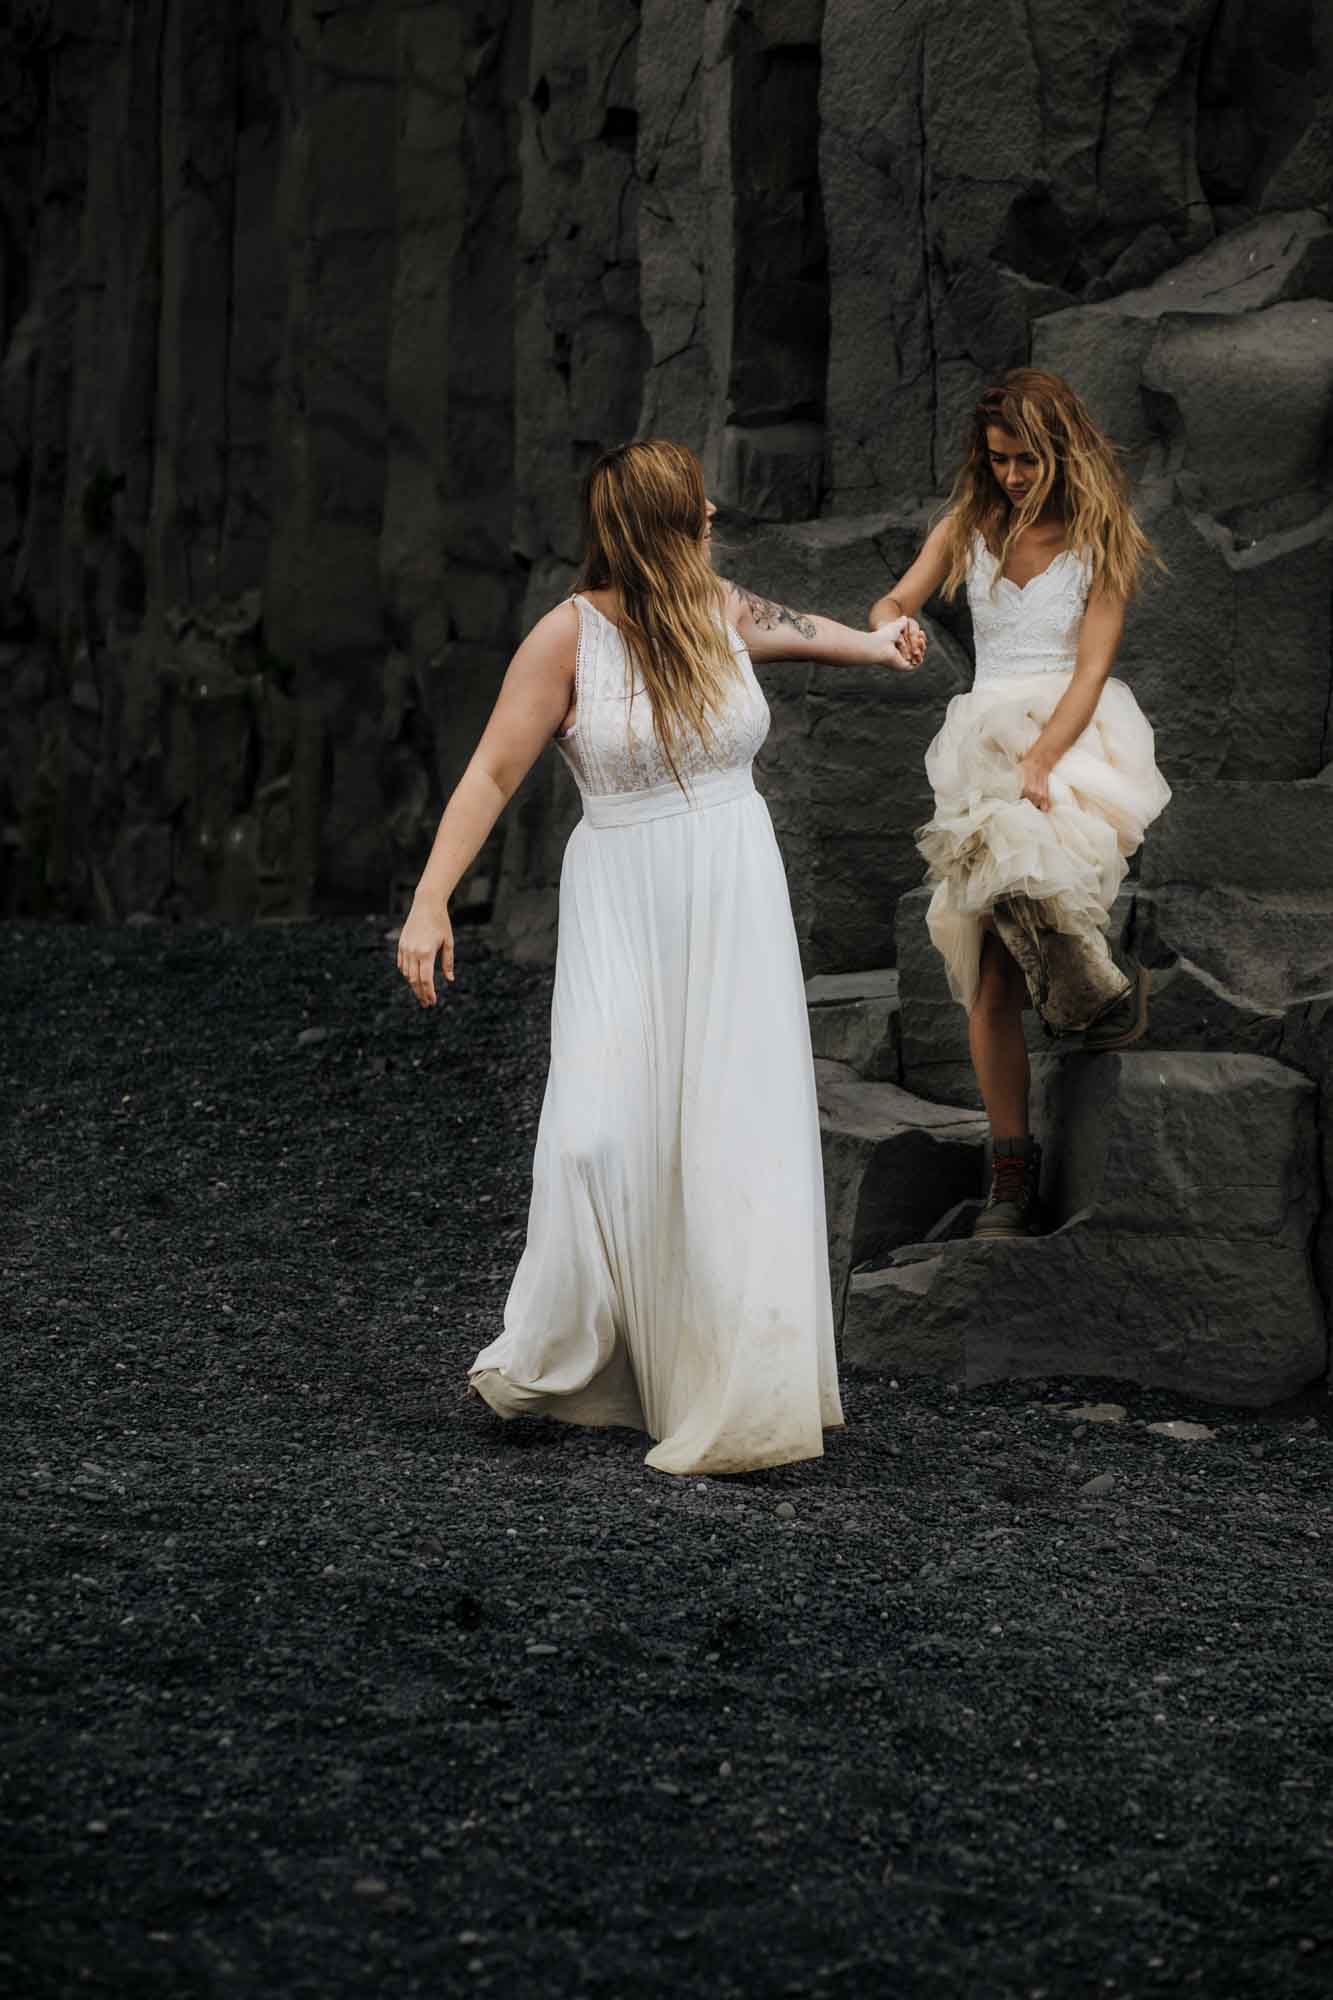 After an 18-month engagement, Cassidy and Hannah traveled from their home in West Hartford, Connecticut, to Iceland for an epic elopement. Their photographer Allie Dearie captured images of their love while the couple spent time together under massive cascading waterfalls and on the dark and moody beach.